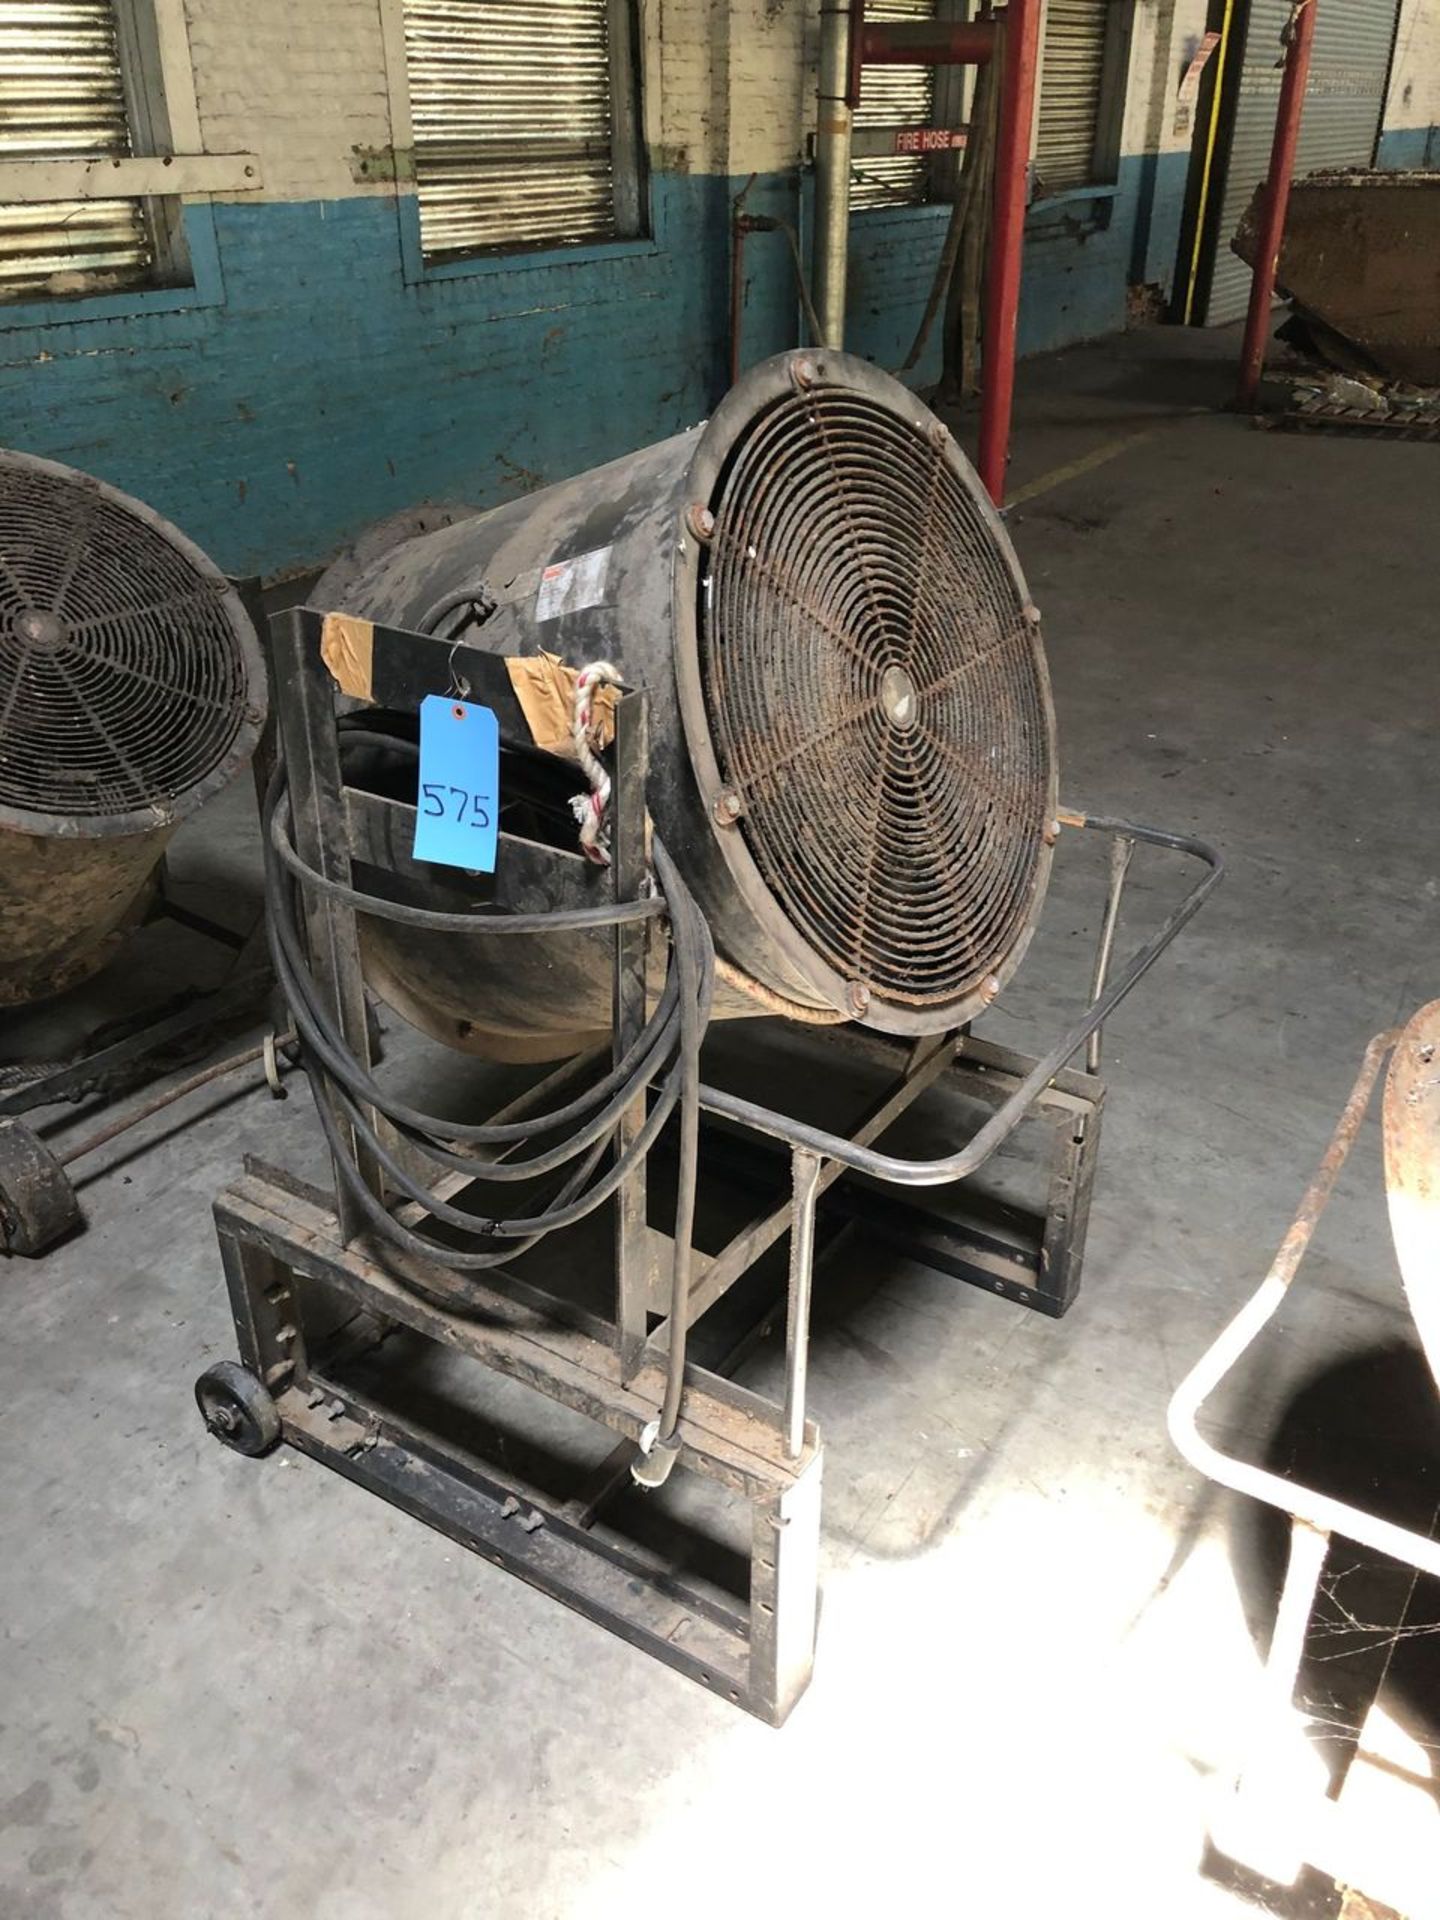 Industrial Stand Fans On Wheels 24 inch, Dayton Hi velocity Industrial Stand Fan, Model # 5M170, - Image 3 of 3